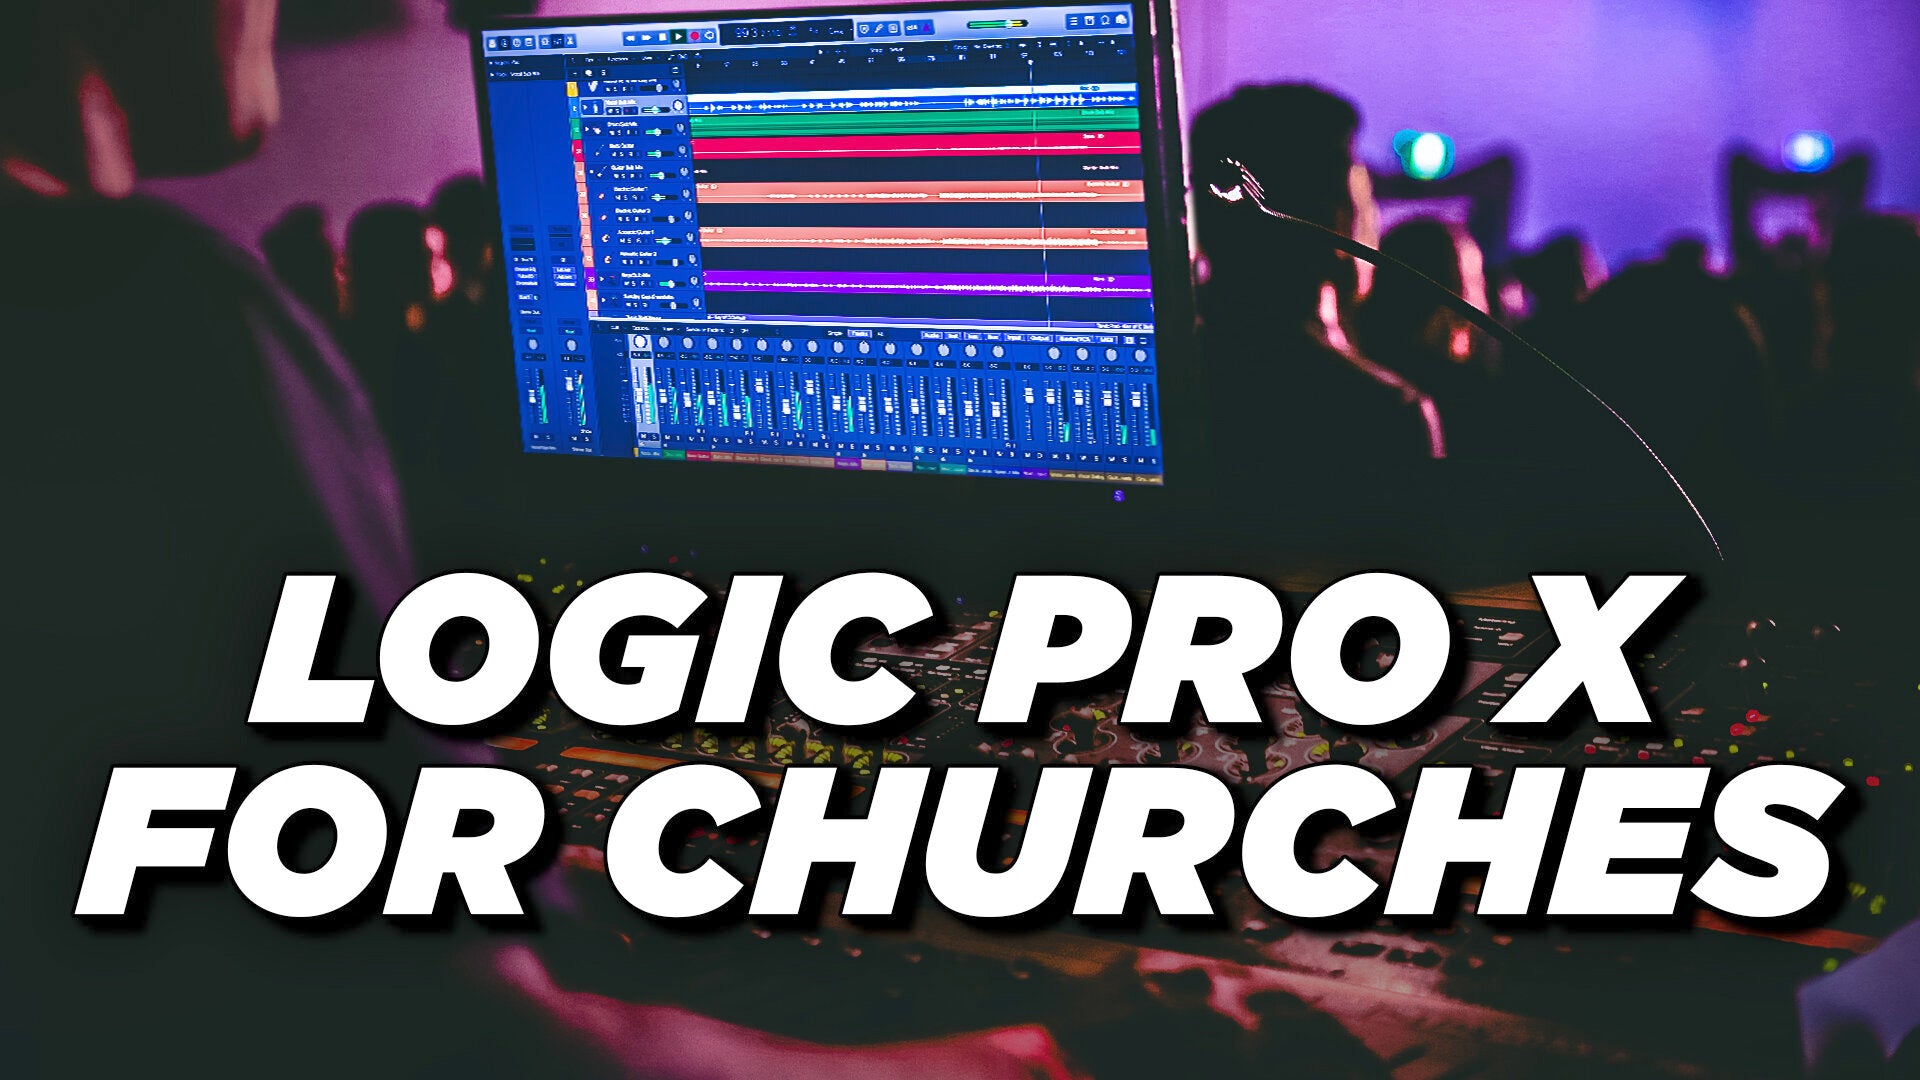 Logic Pro X for Church Livestream and Broadcast Mixing